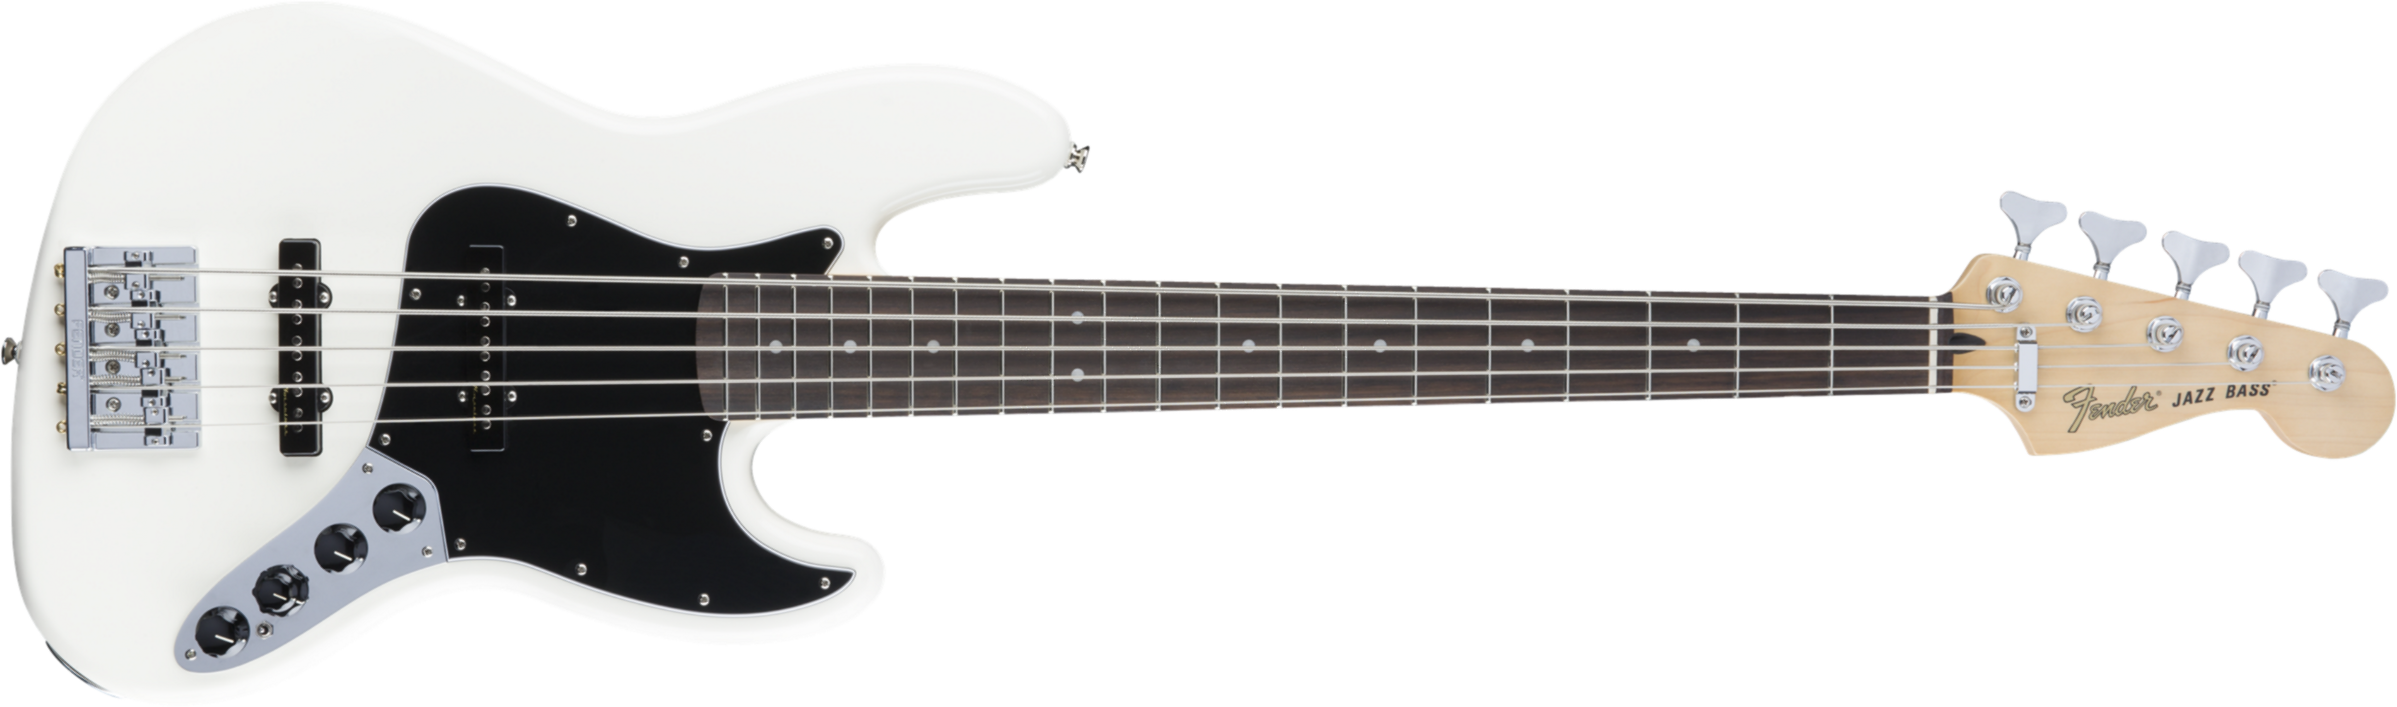 Fender Jazz Bass Deluxe Active Pf - Olympic White - Solid body elektrische bas - Main picture